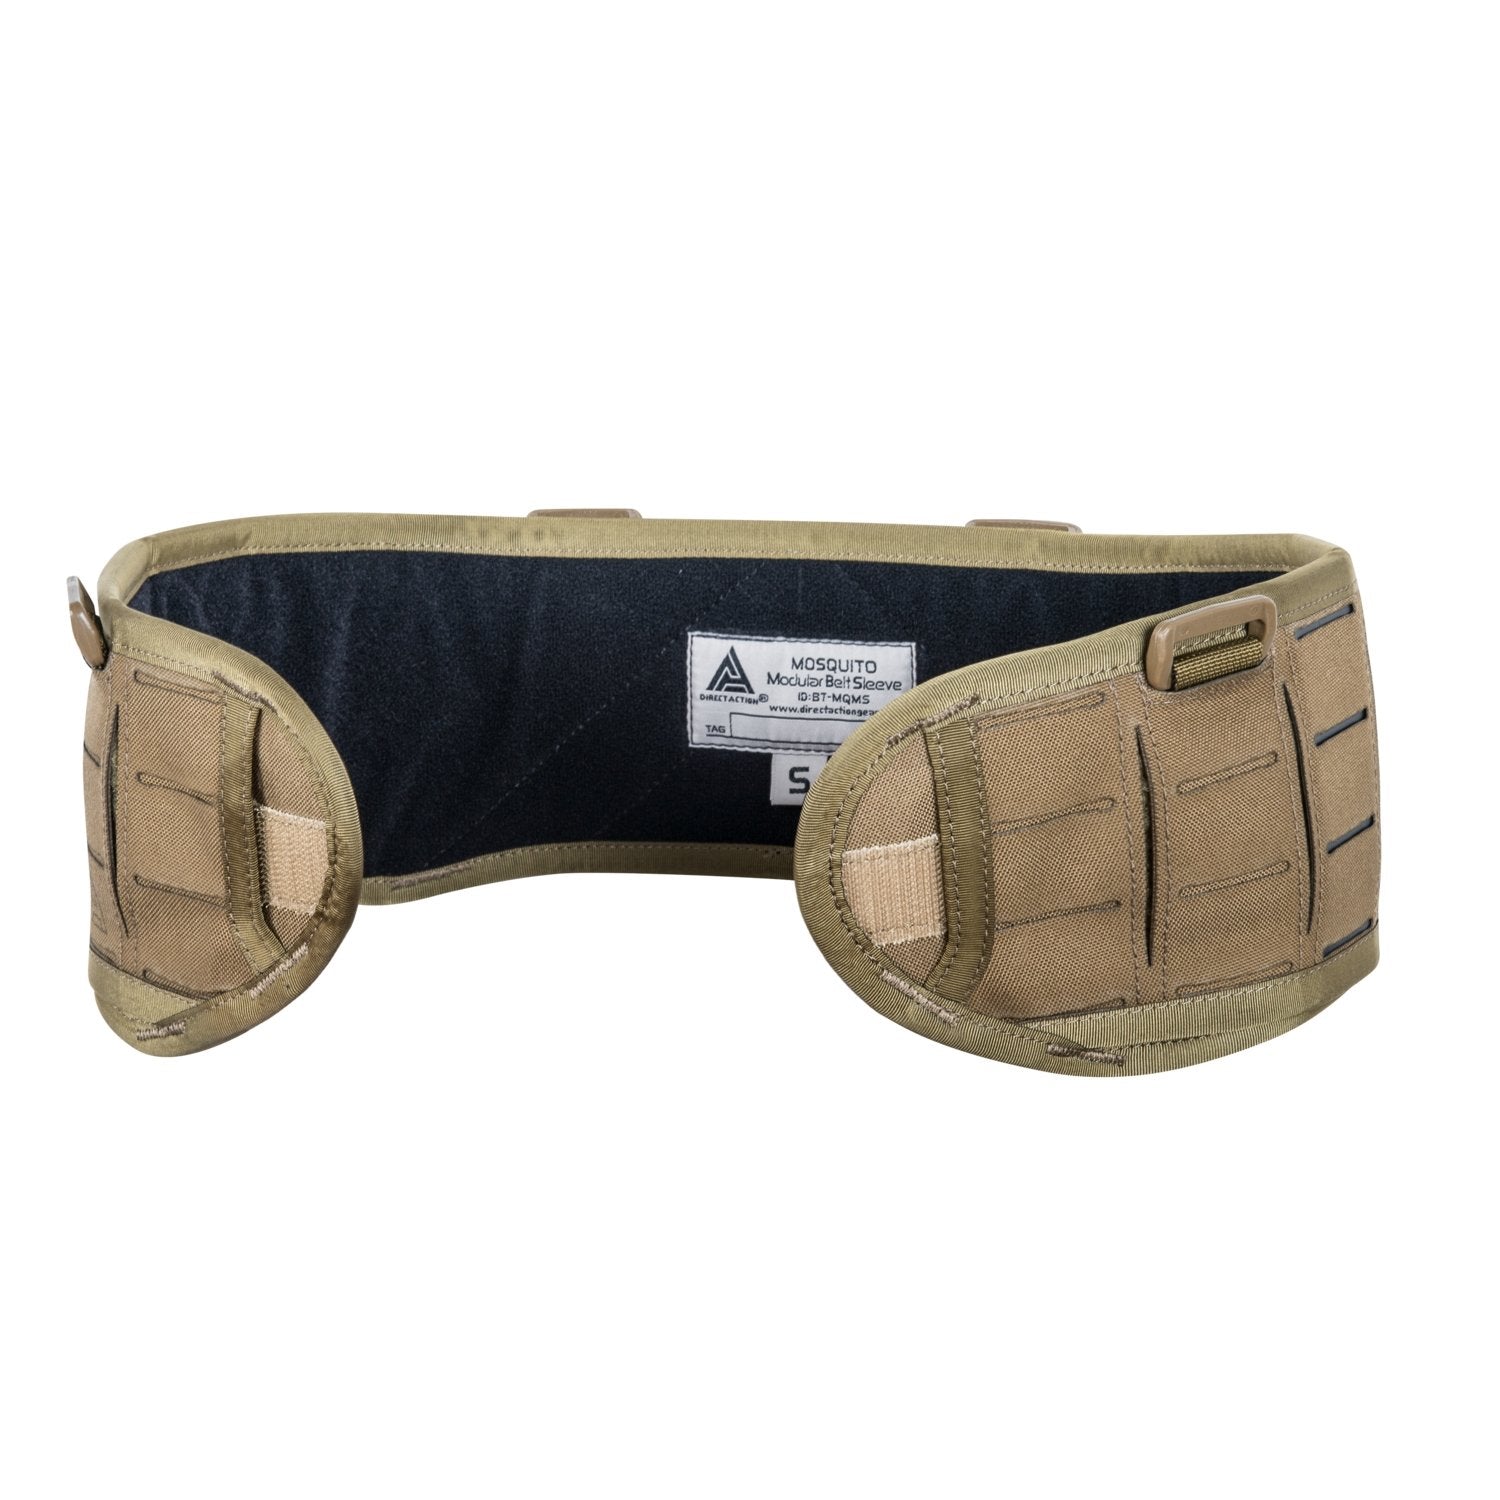 Direct Action Mosquito Modular Belt Sleeve® Coyote Brown